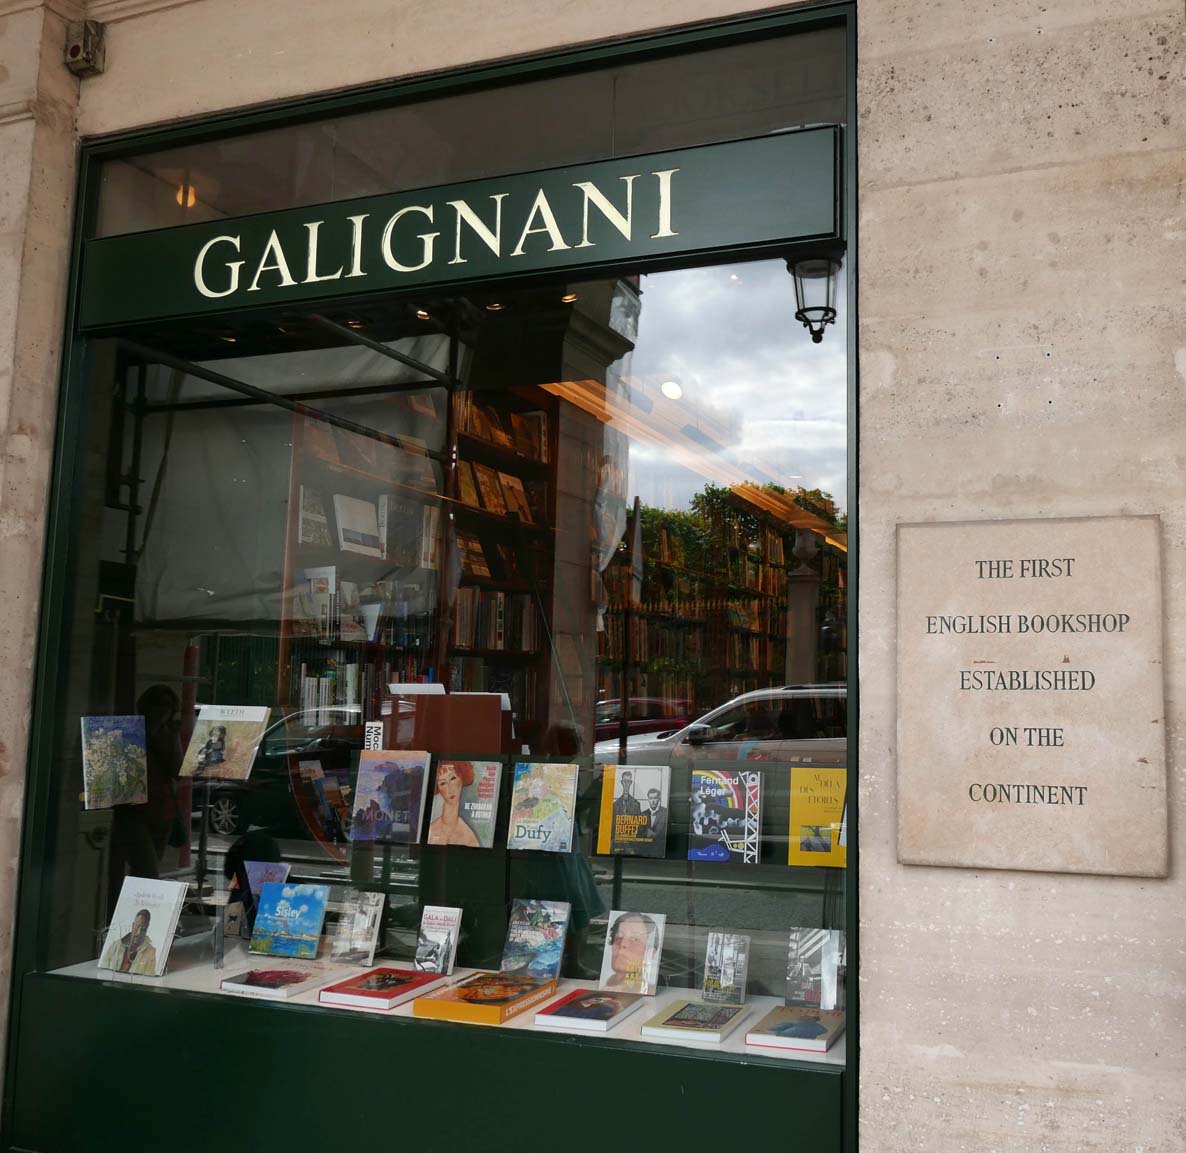 Galignani Bookstore, also visited by the Joneses in 1844